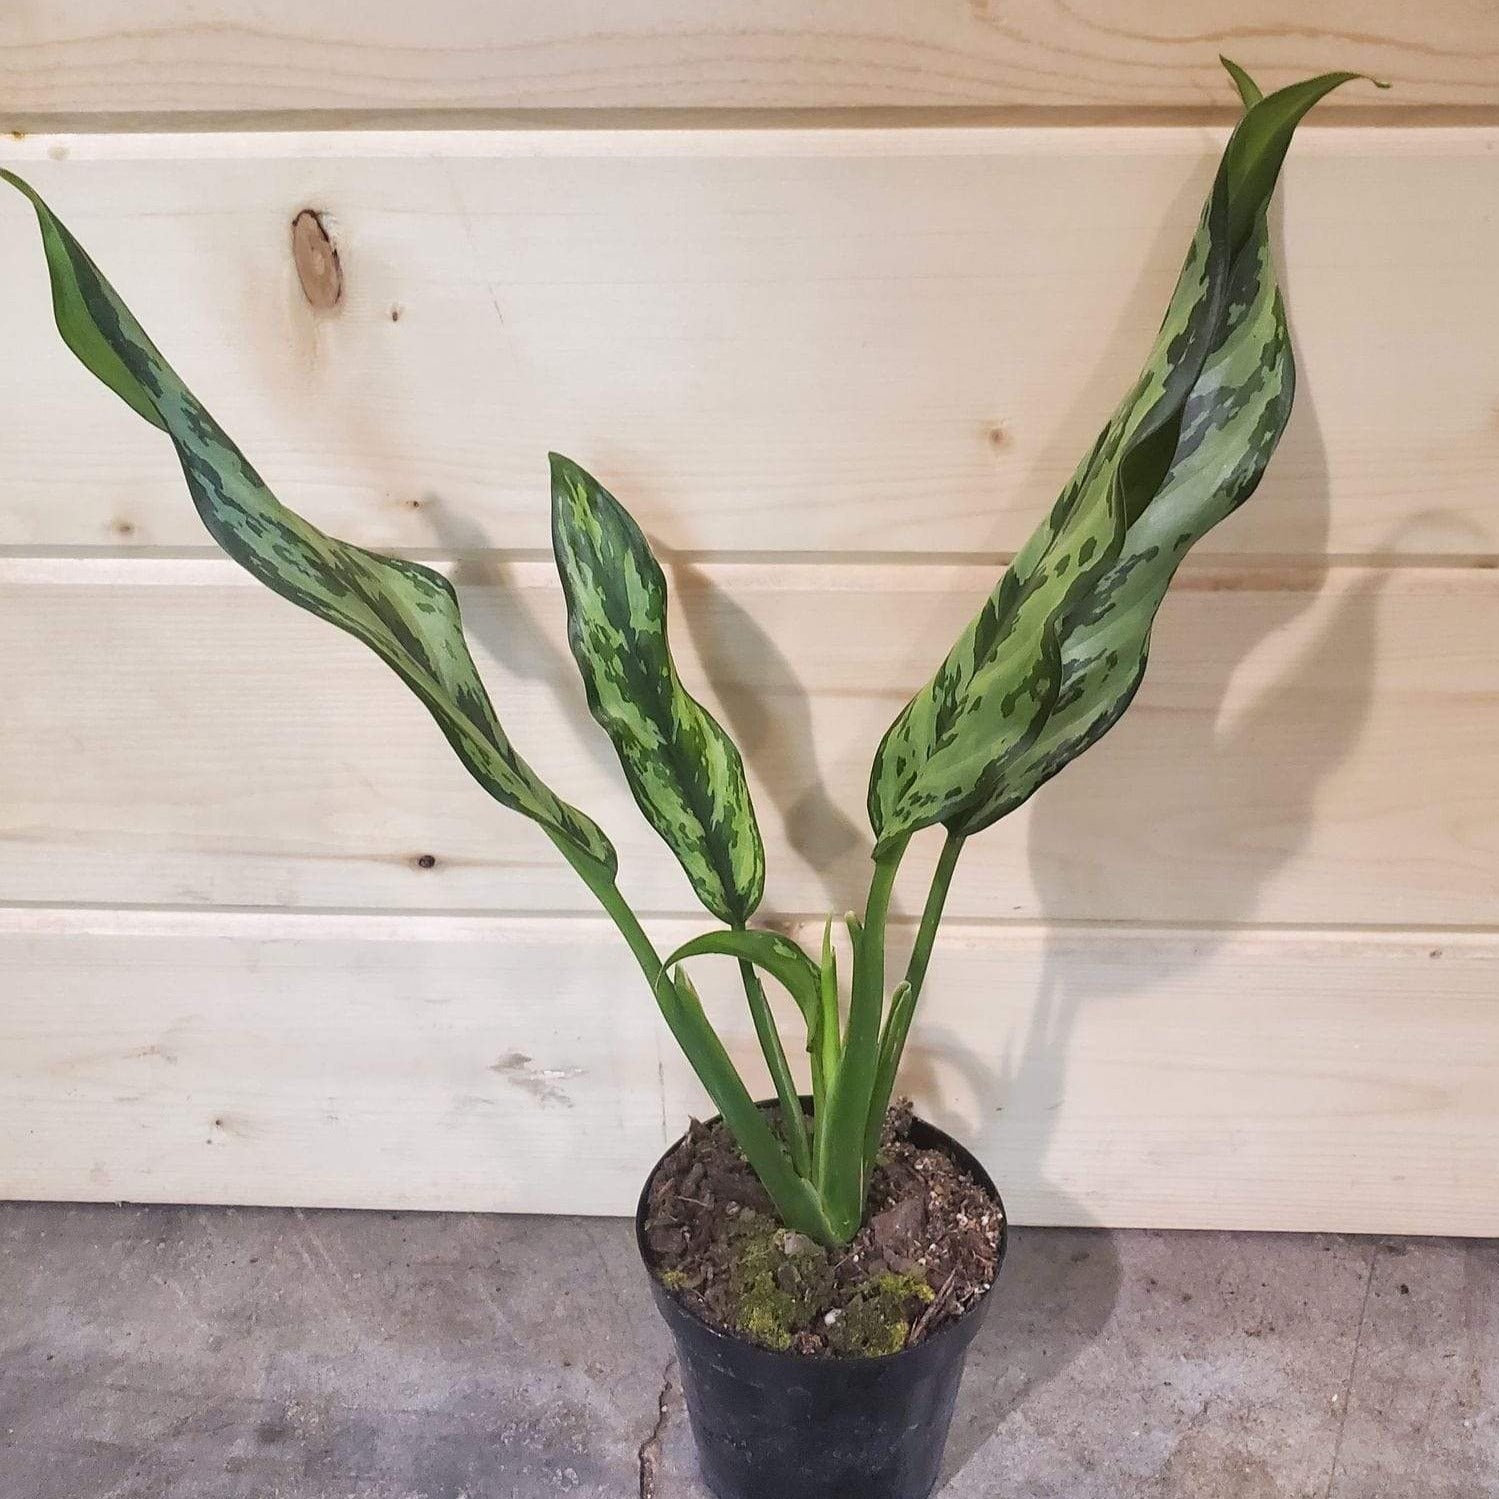 Urban Sprouts Plant 4" in nursery pot Chinese Evergreen 'Juliette'